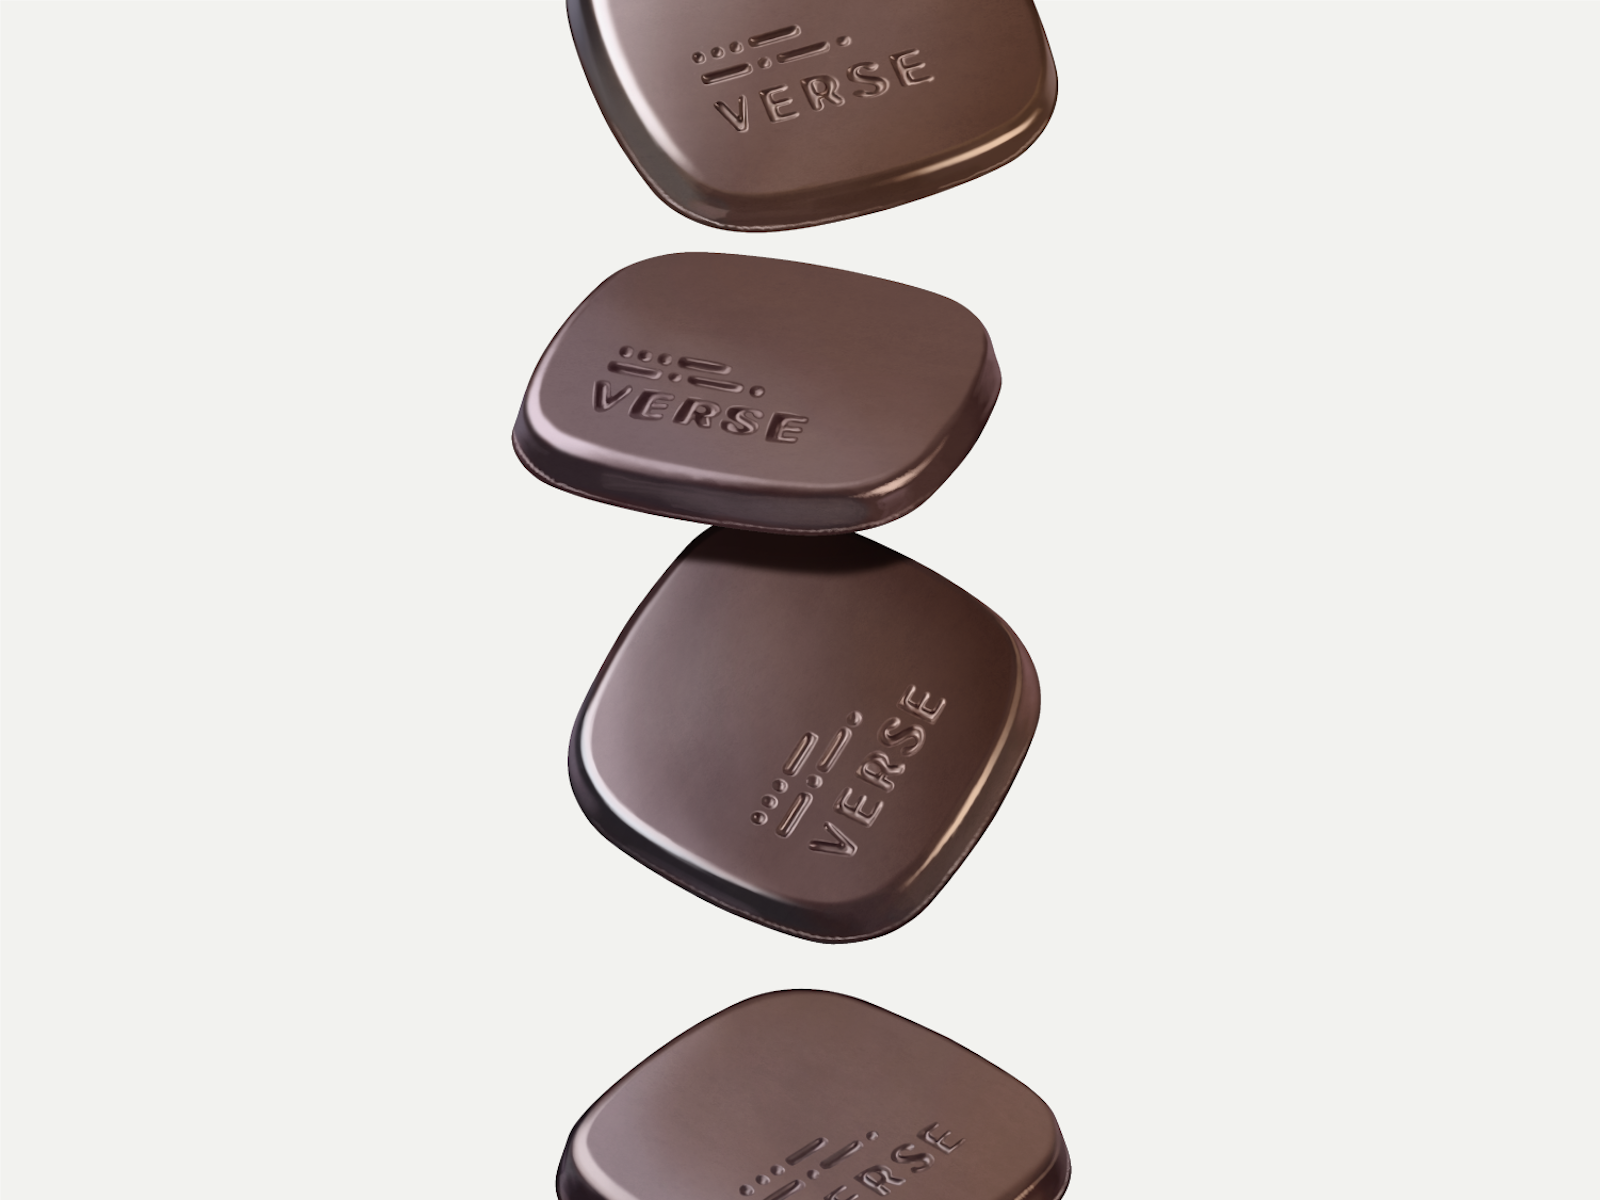 The Verse Chocolate brand design with four individual medallions falling with brand name on them.